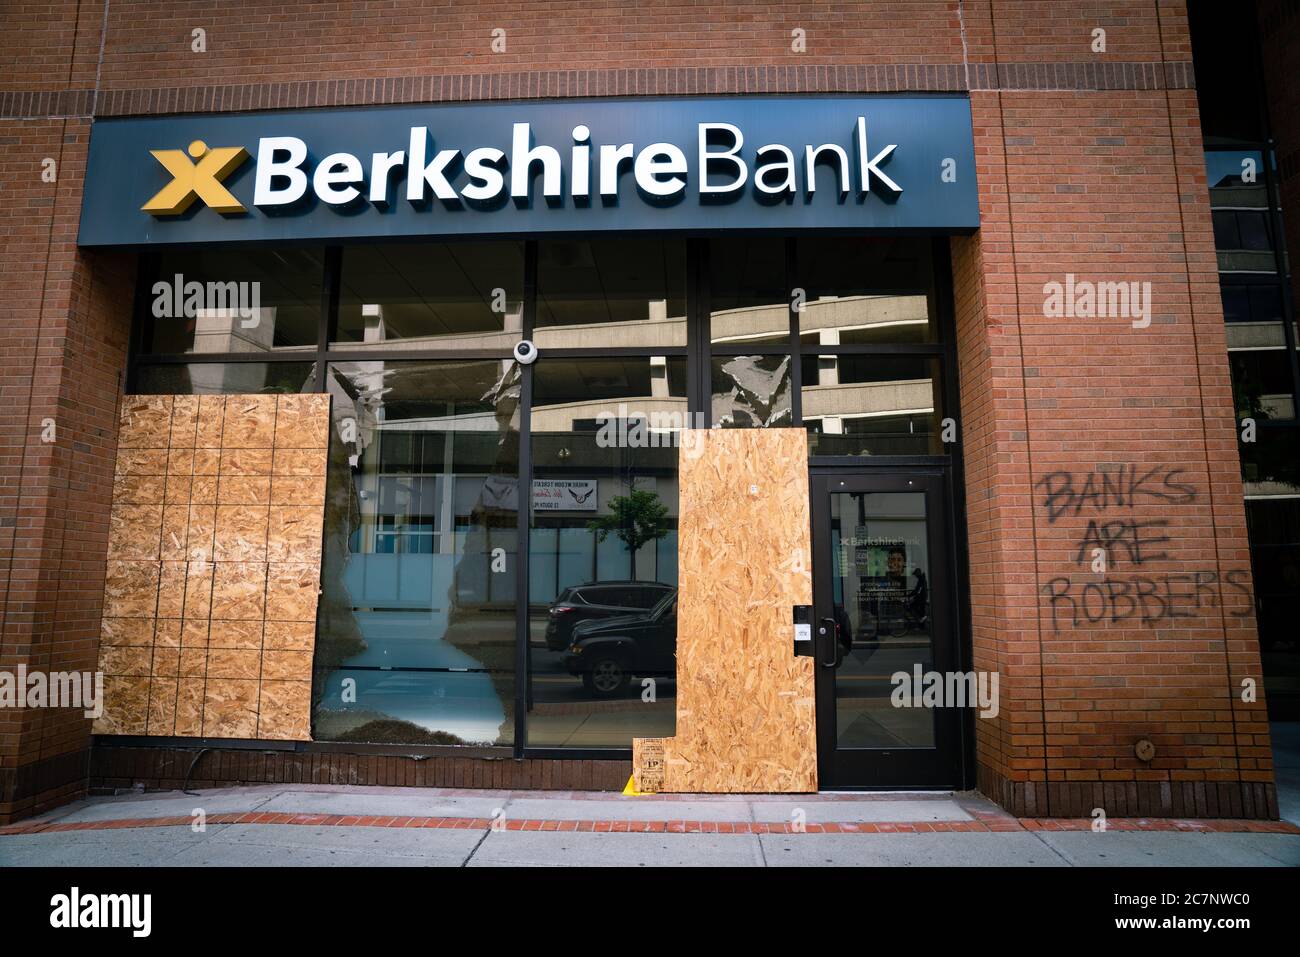 ALBANY, NEW YORK, UNITED STATES - May 31, 2020: A boarded up bank that was vandalized during race riots following the death of George Floyd in Albany, Stock Photo